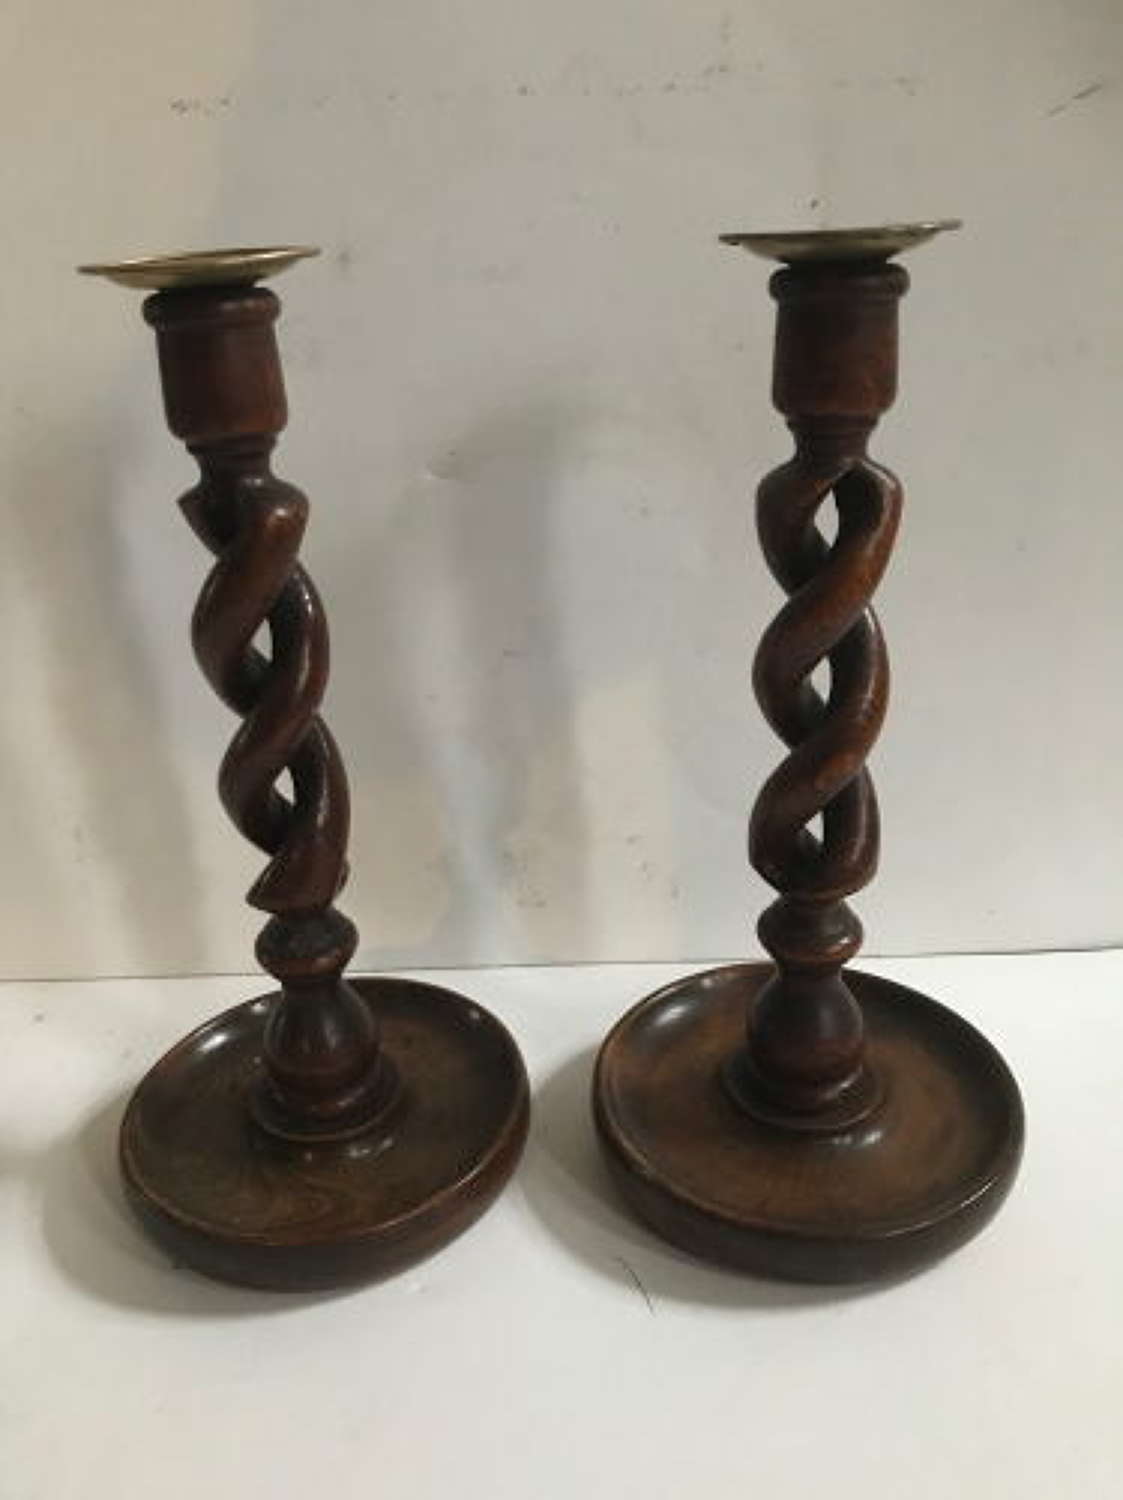 Pair of Early 20th Century Wooden Candlesticks